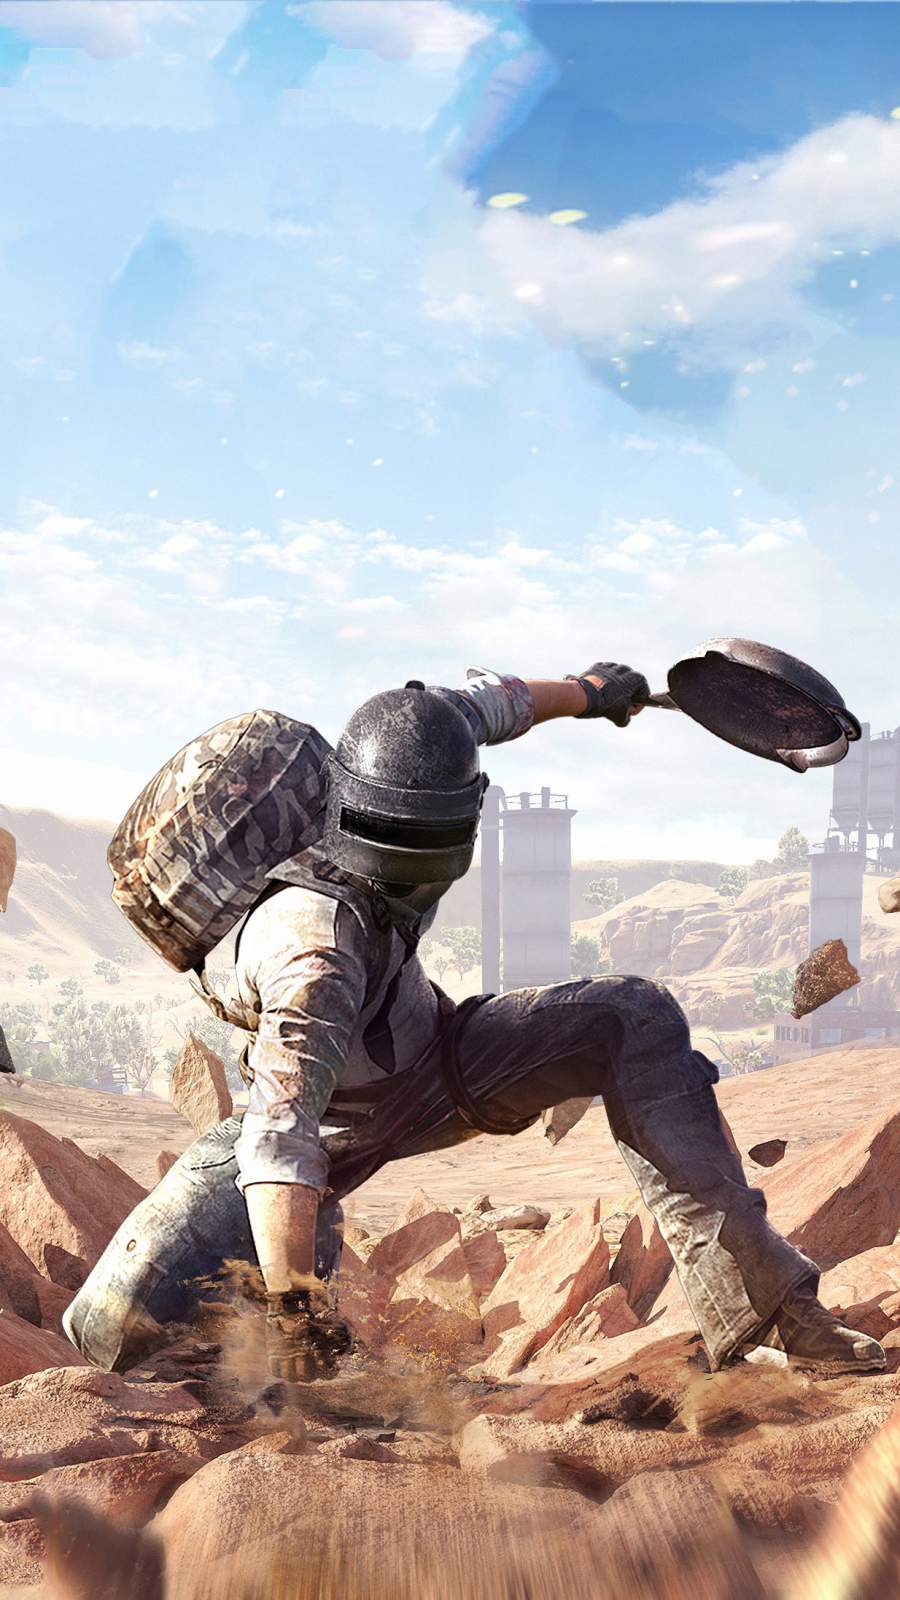 PUBG King IPhone Wallpaper - IPhone Wallpapers : iPhone Wallpapers